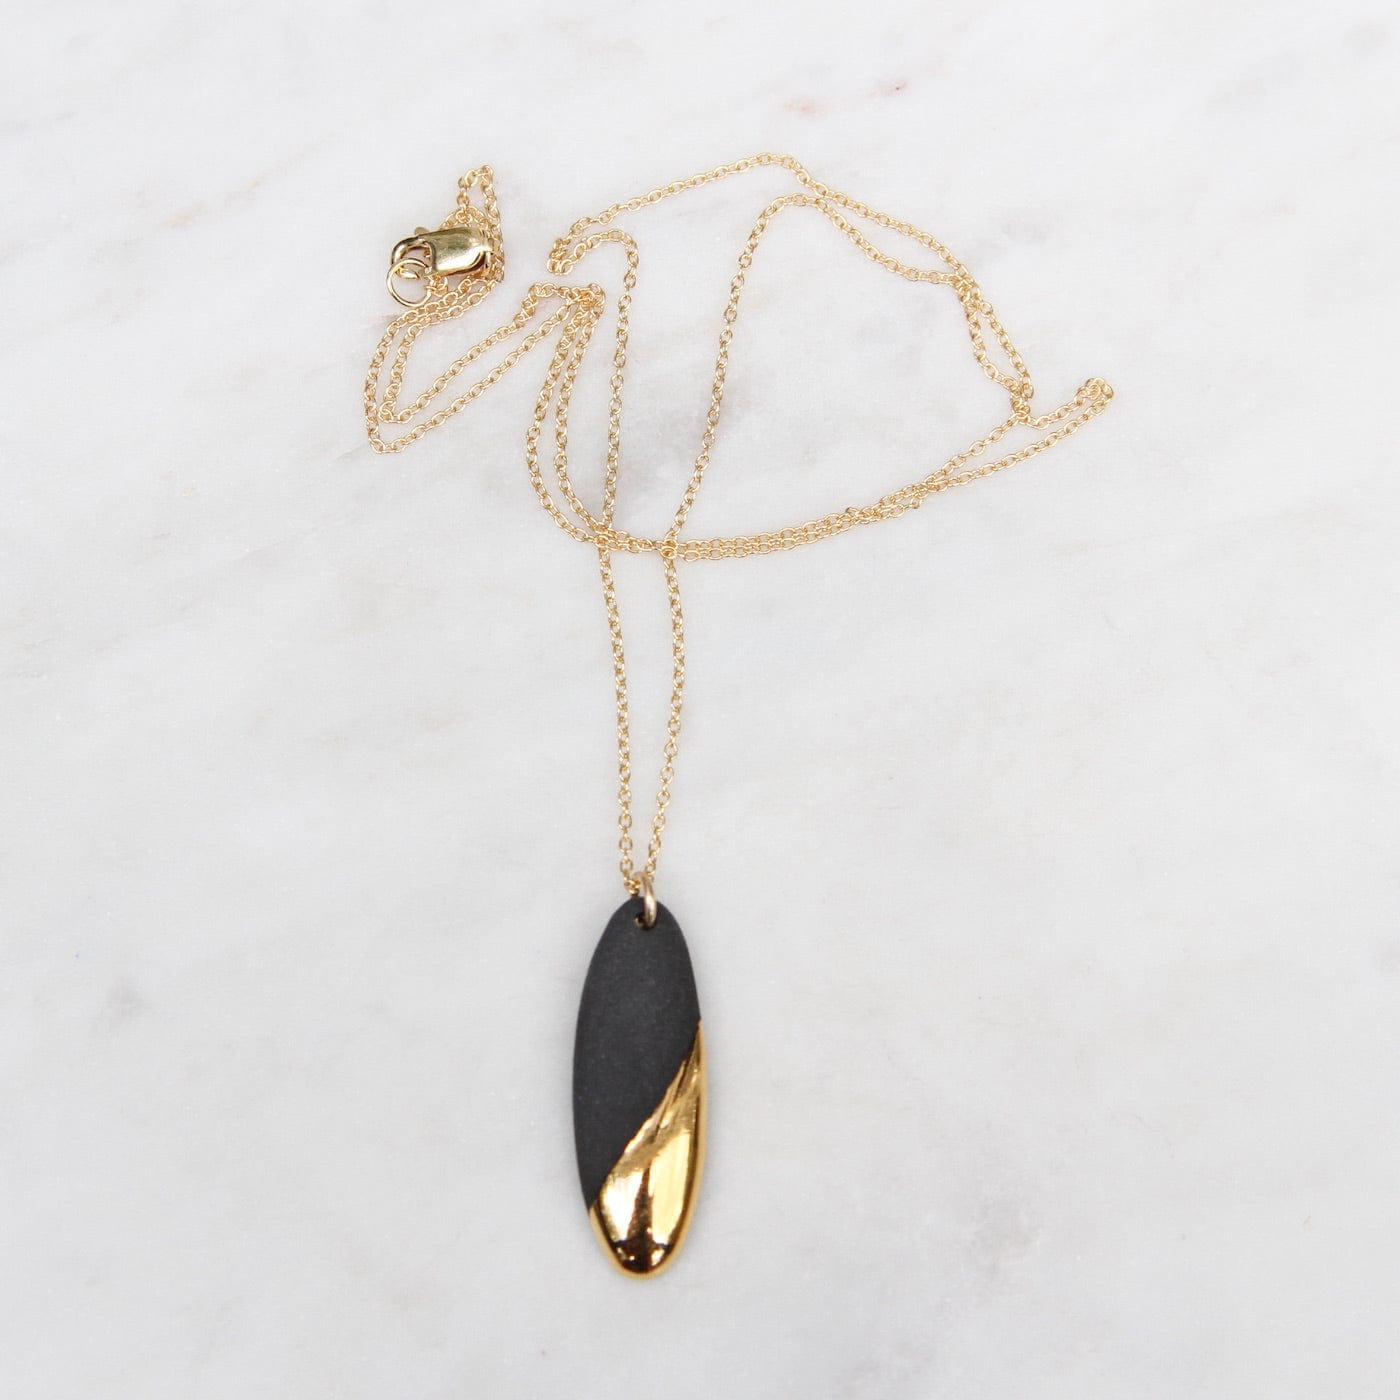 NKL-GF Gold Dipped Long Oval Necklace - Black